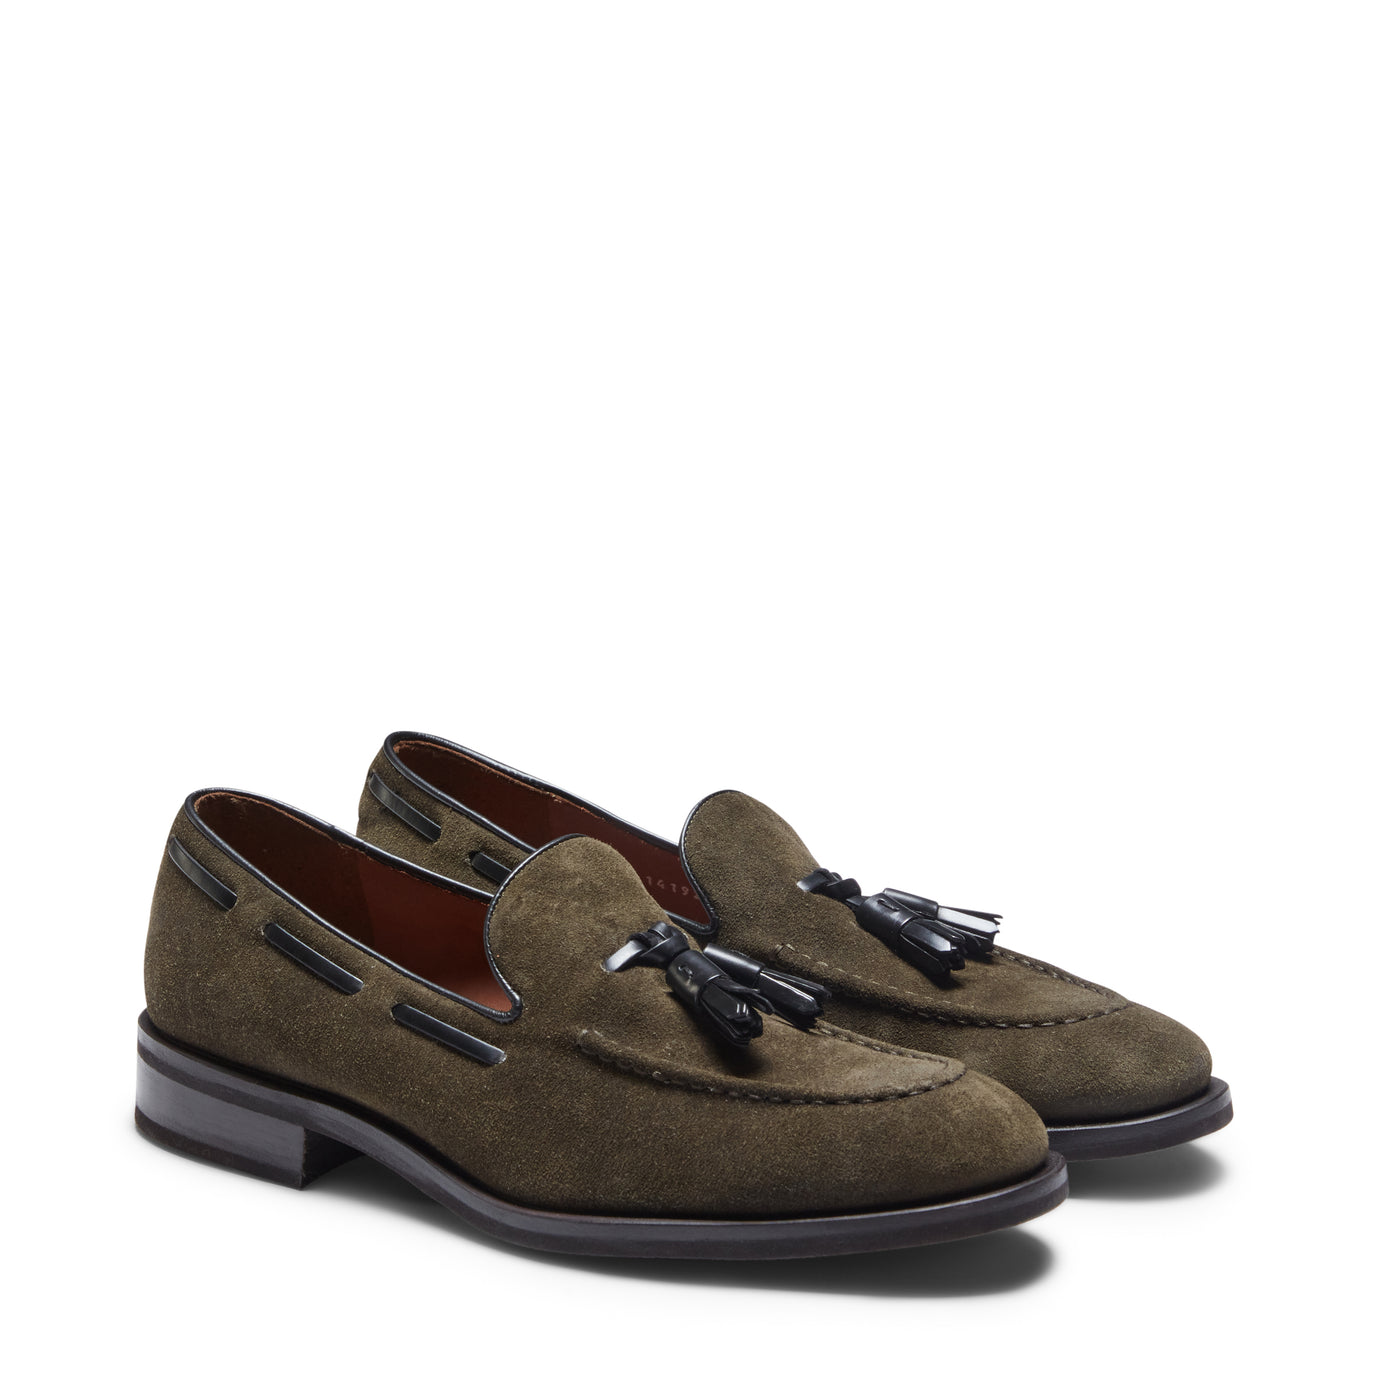 Shop The Latest Collection Of Fratelli Rossetti Fr W Brera Loafer-65971 In Lebanon